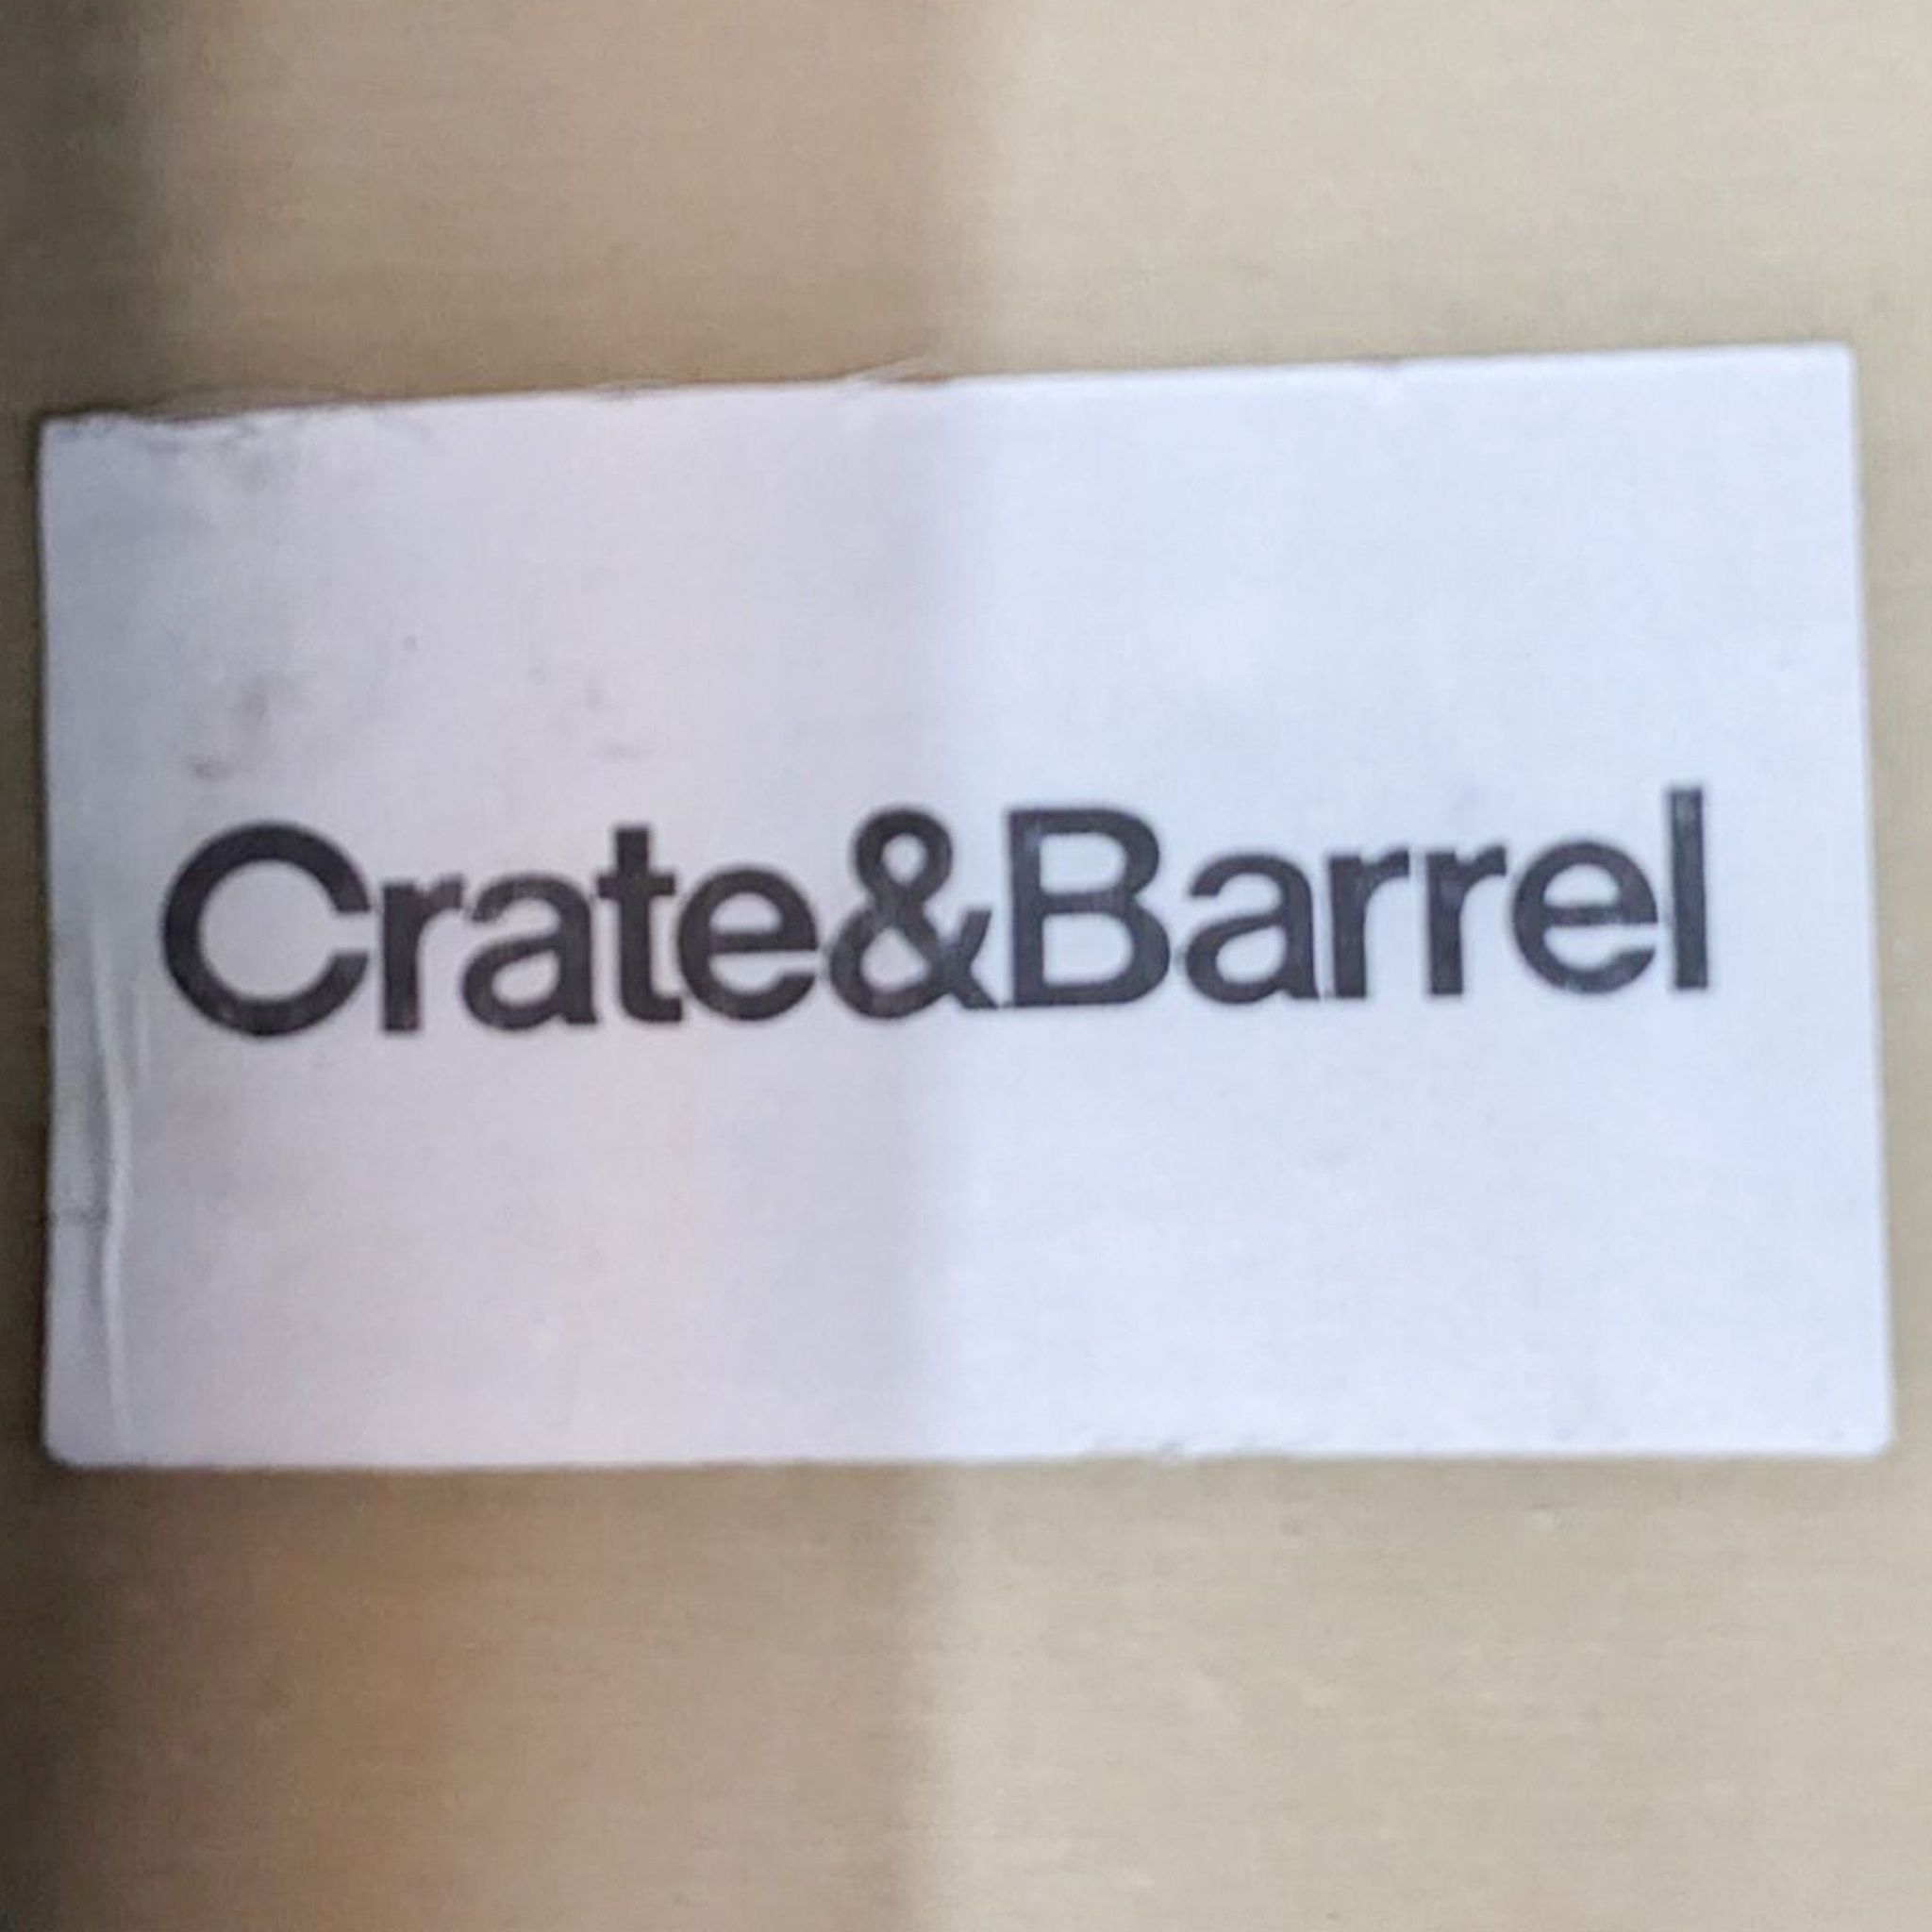 Crate & Barrel brand label on packaging, indicating the brand of a furniture item, such as a sofa.